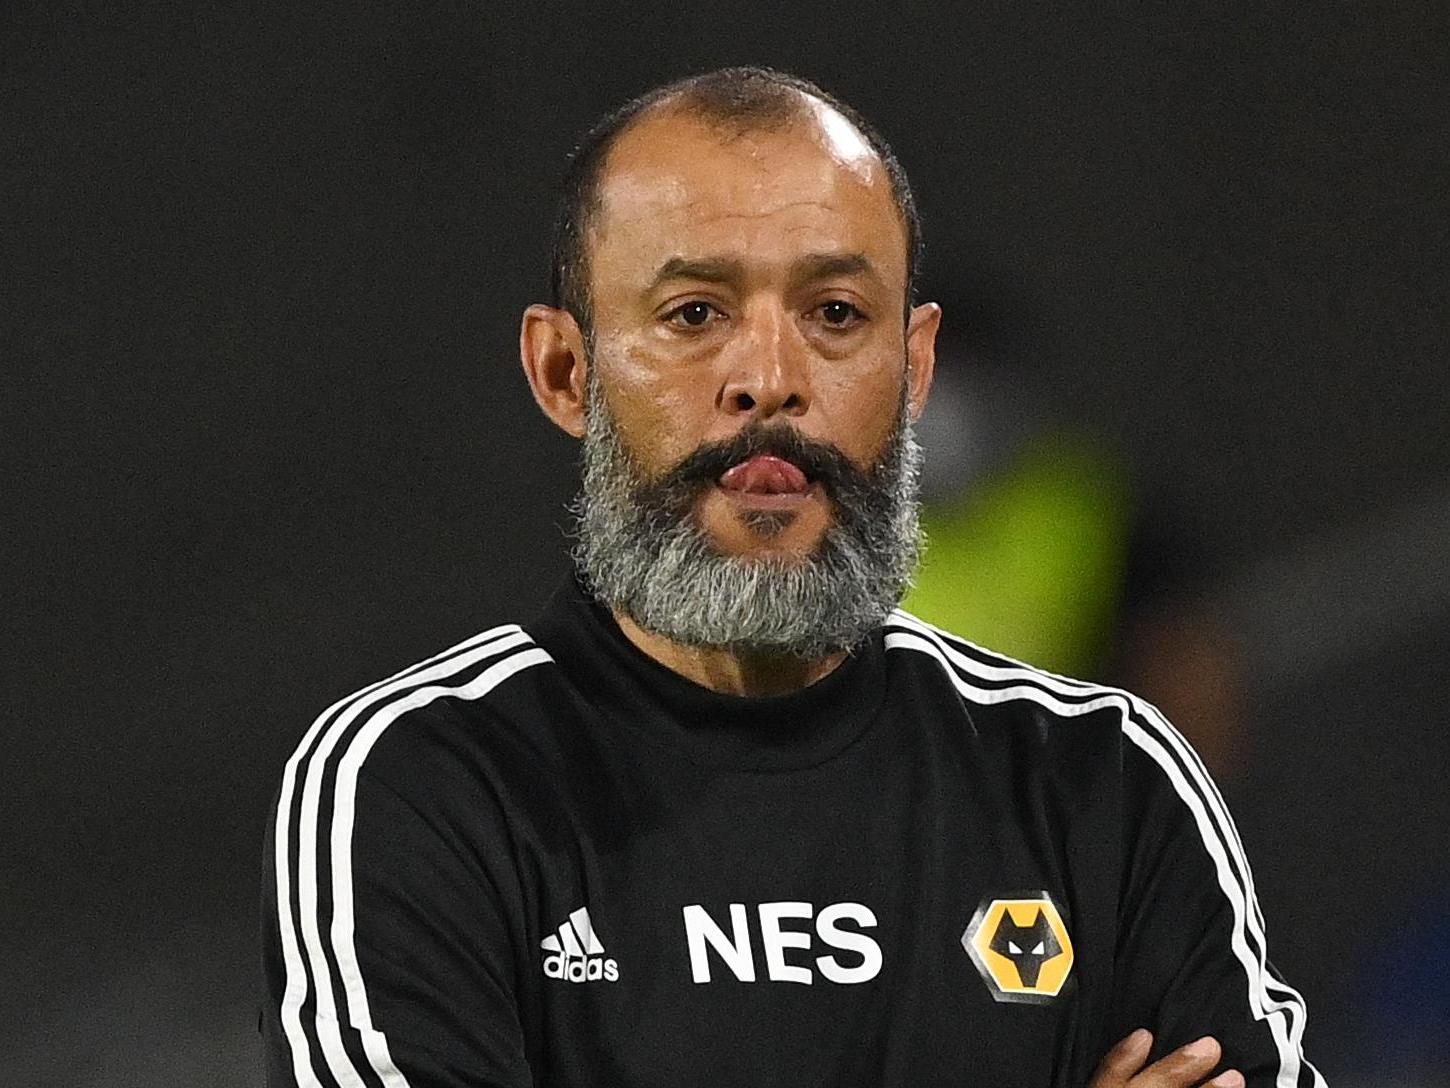 Nuno calls for more signings after Wolves exit Europa League after late Sevilla winner